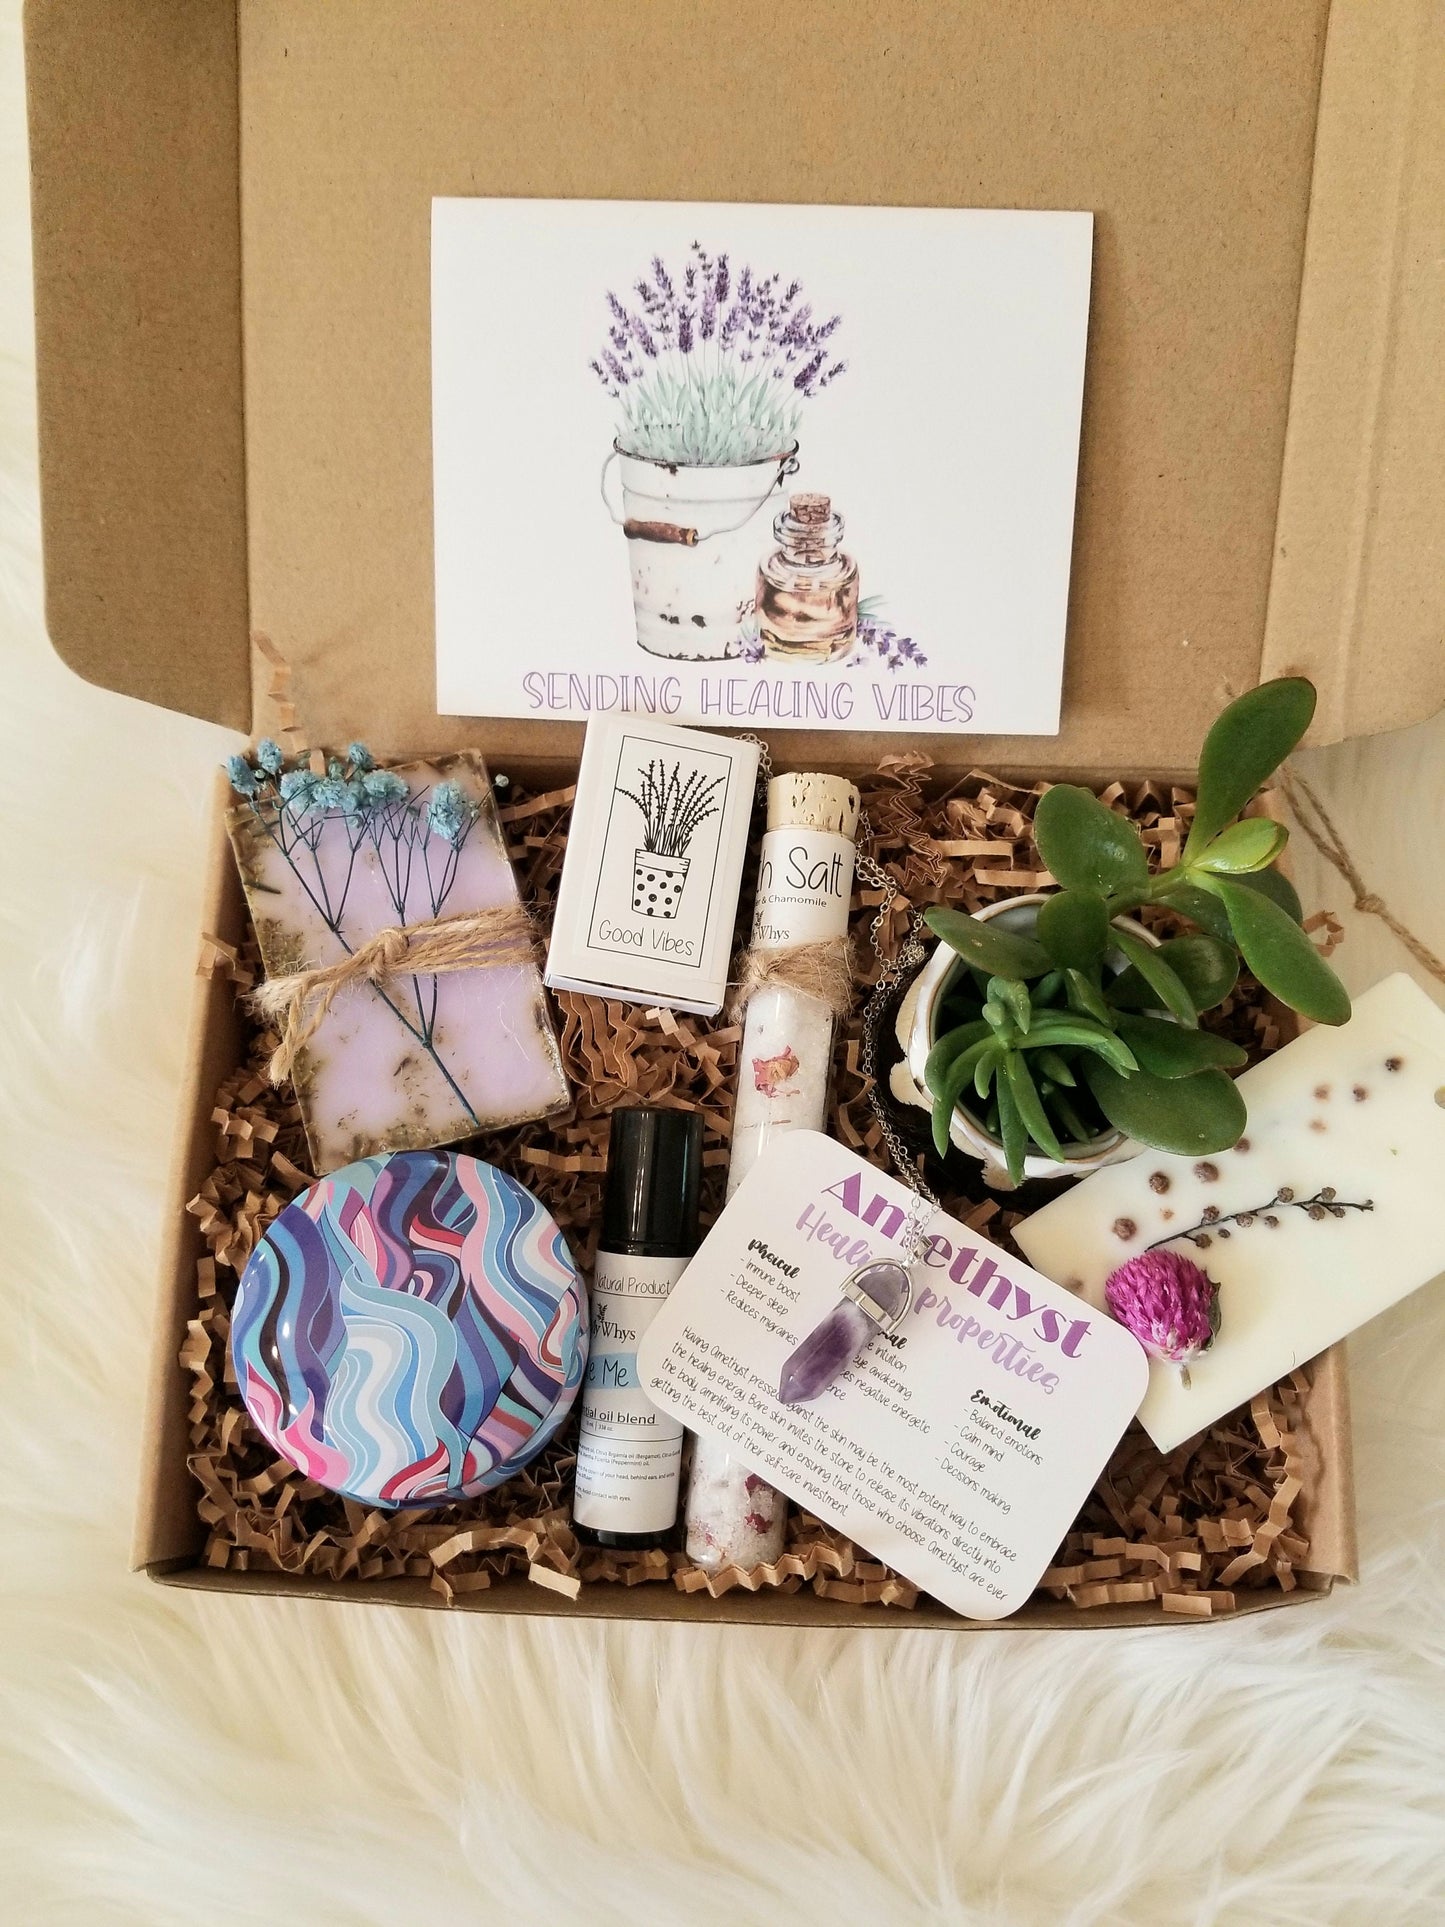 Sending healing vibes gift basket, Thinking of you care package, spirituality gift box, send a healing vibes package, amethyst necklace.